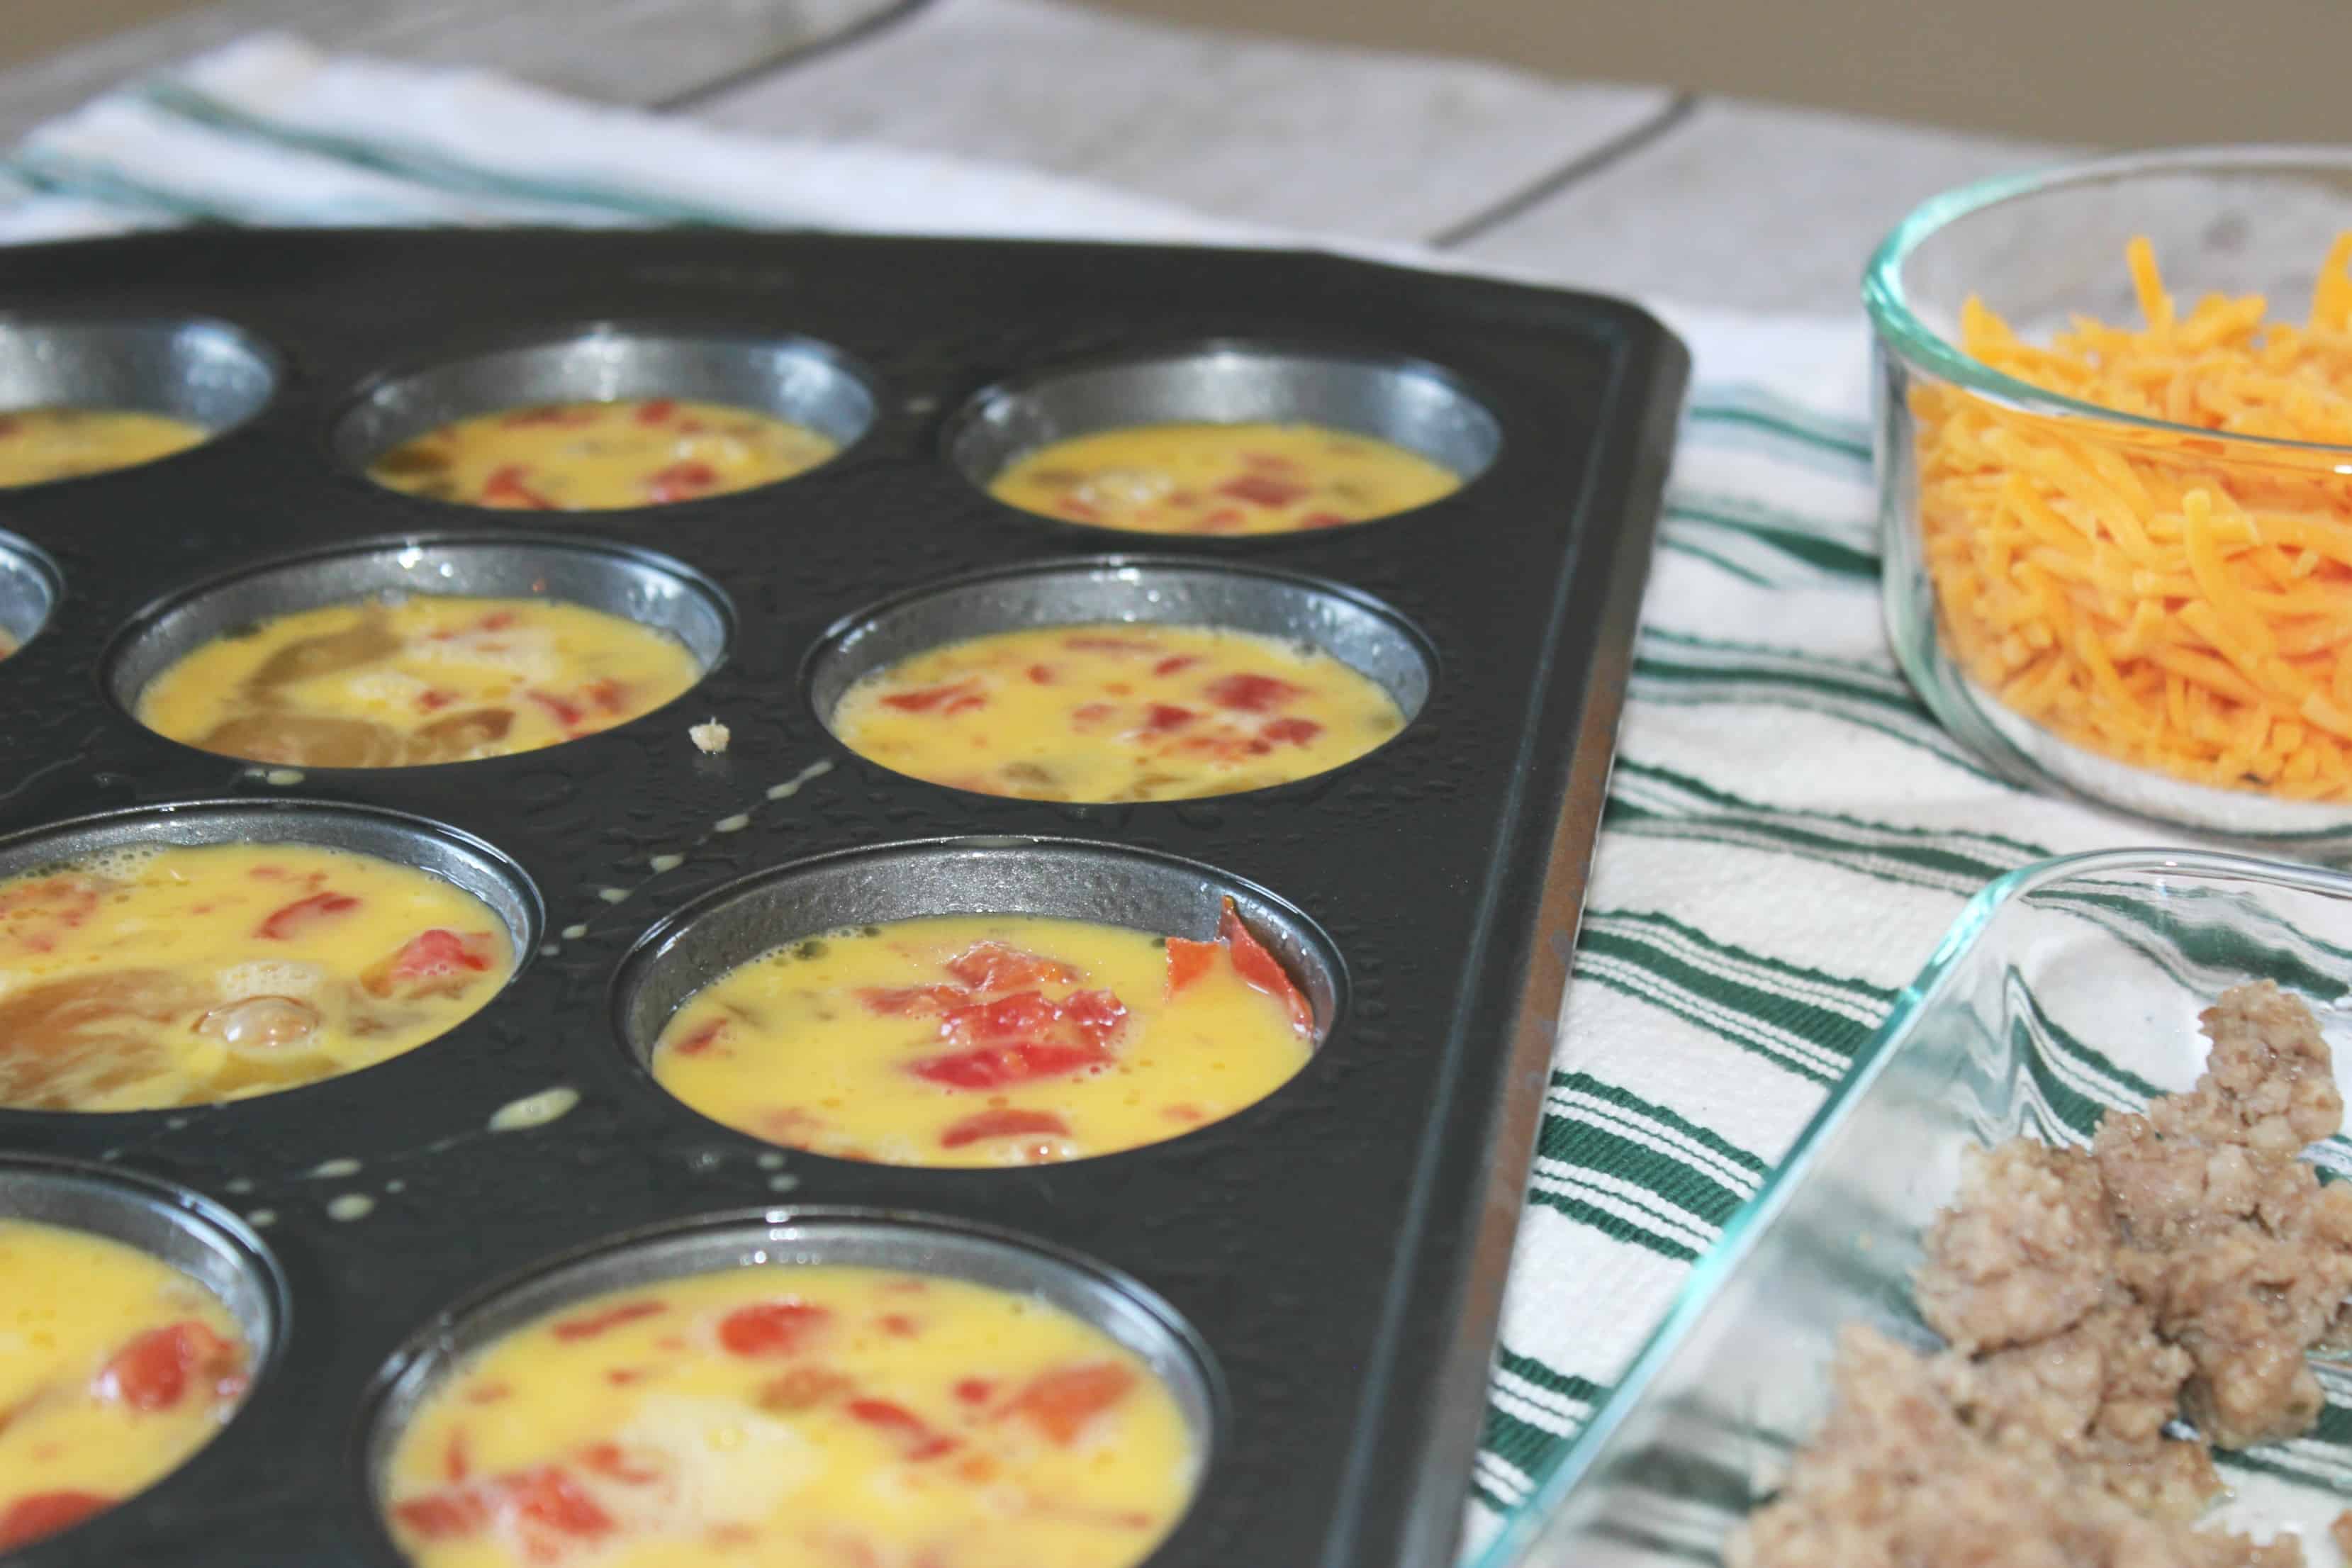 Sausage Egg Omelets In Muffin Tin Recipe To Kick Start Your Morning - Perfect to Re-Heat for a Quick Morning Breakfast on the Go! 